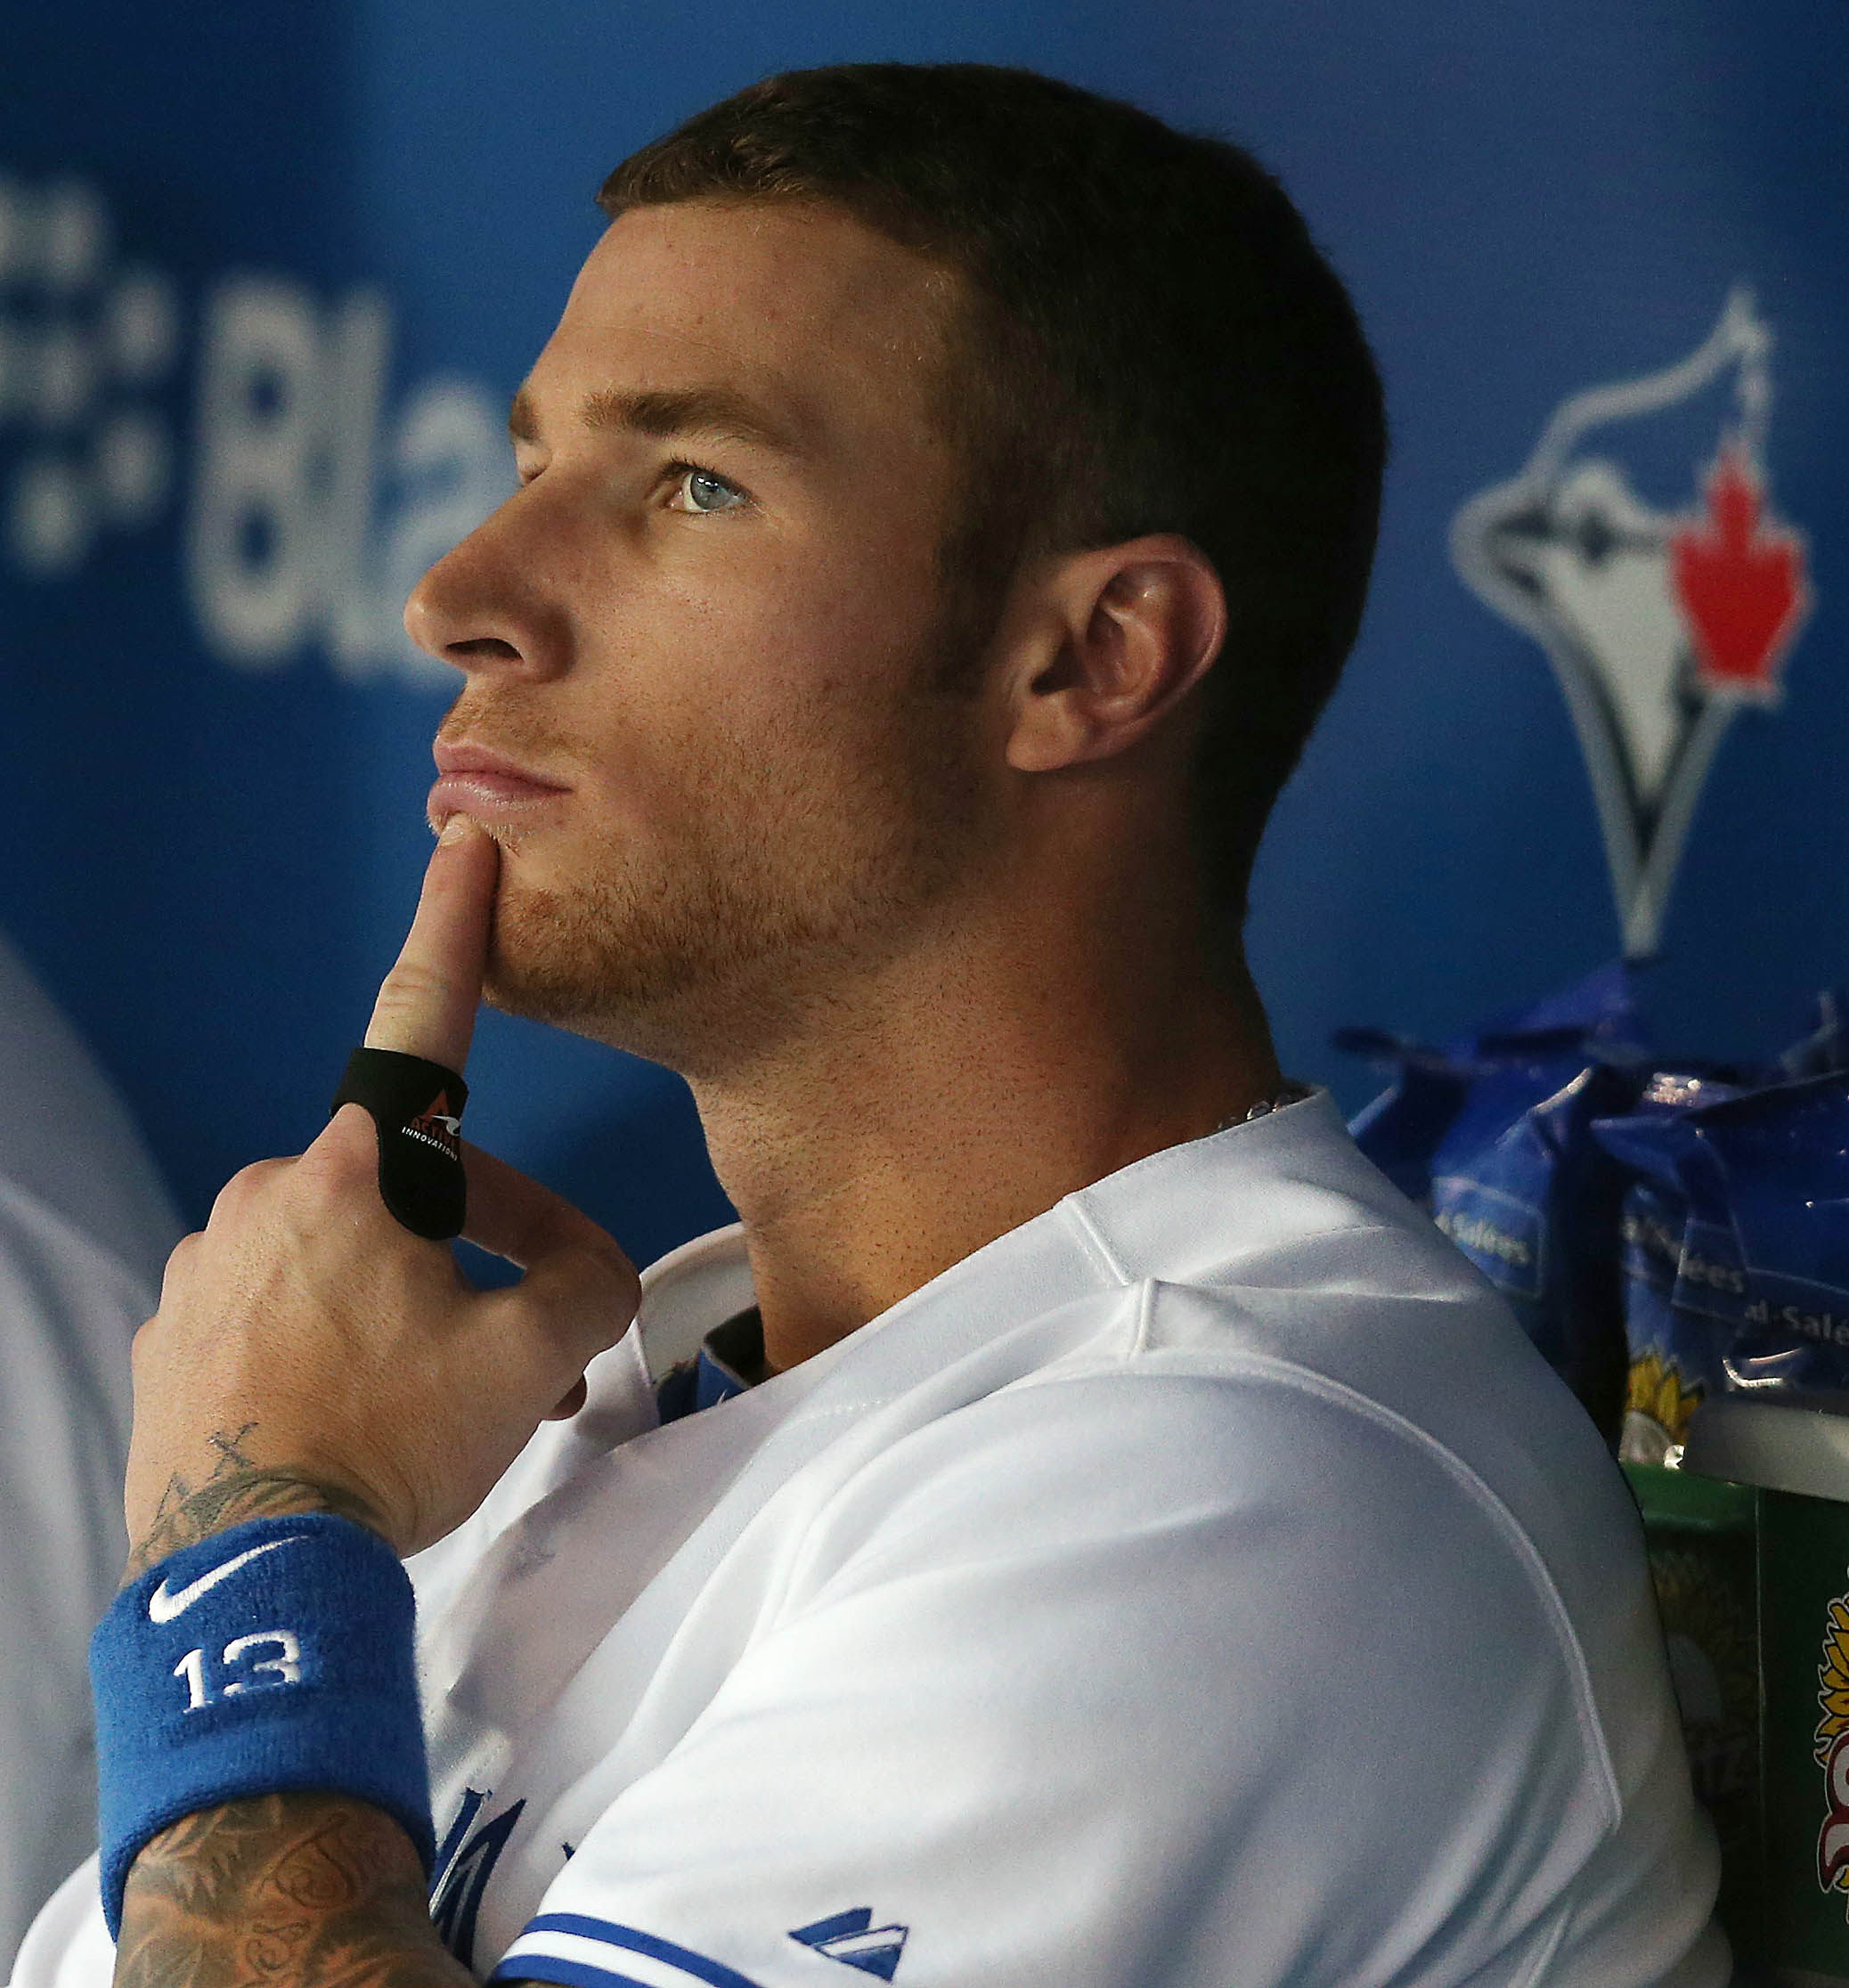 Toronto Blue Jays lose to the Los Angeles Dodgers 8-3 in 10 innings